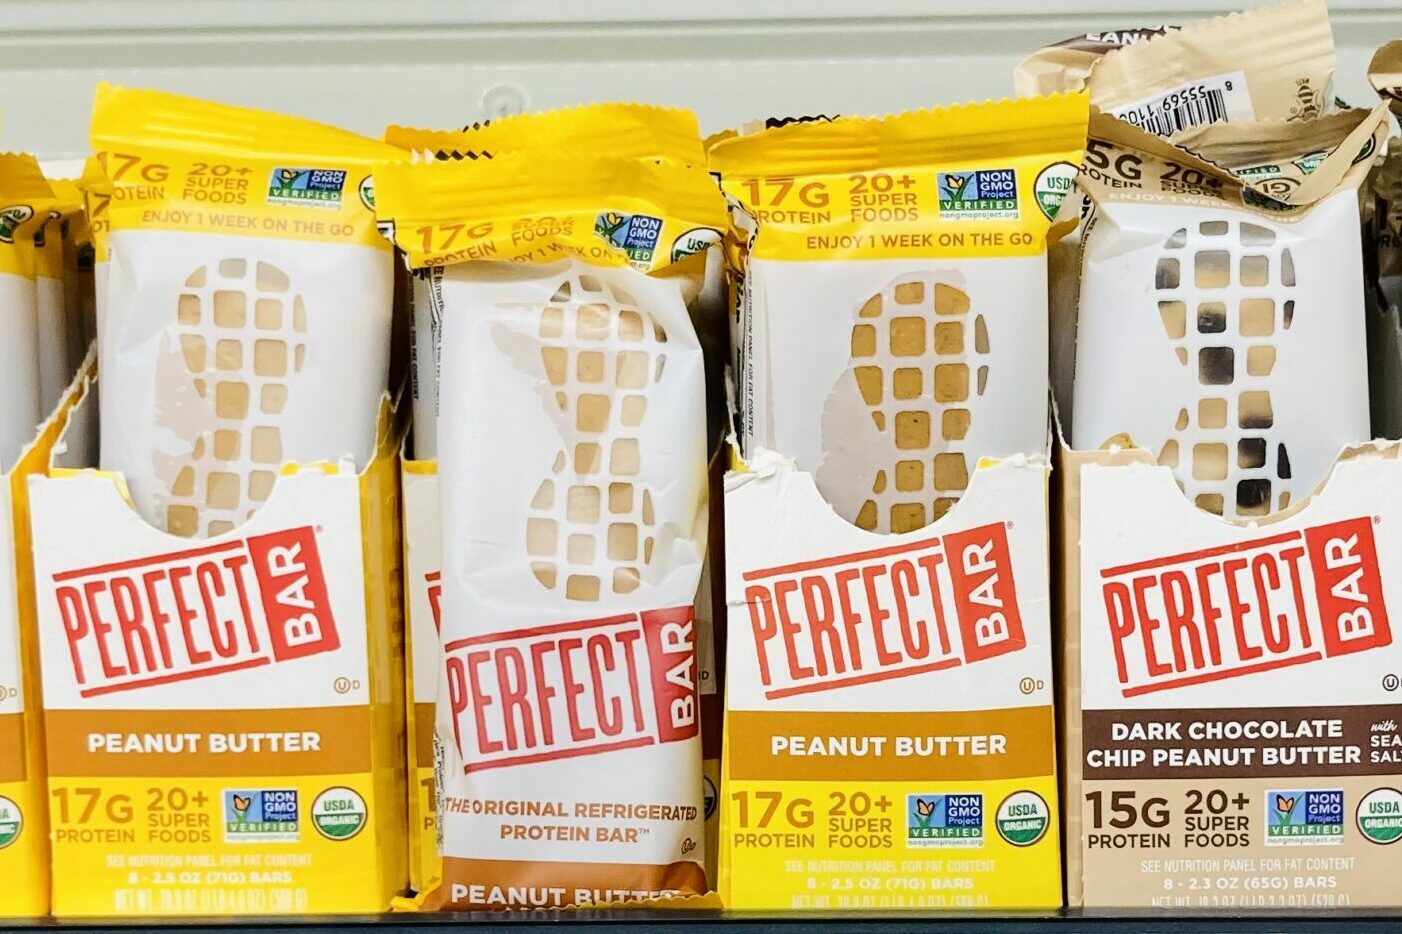 boxes of Perfect Bars in peanut butter and dark chocolate chip peanut butter flavors. 